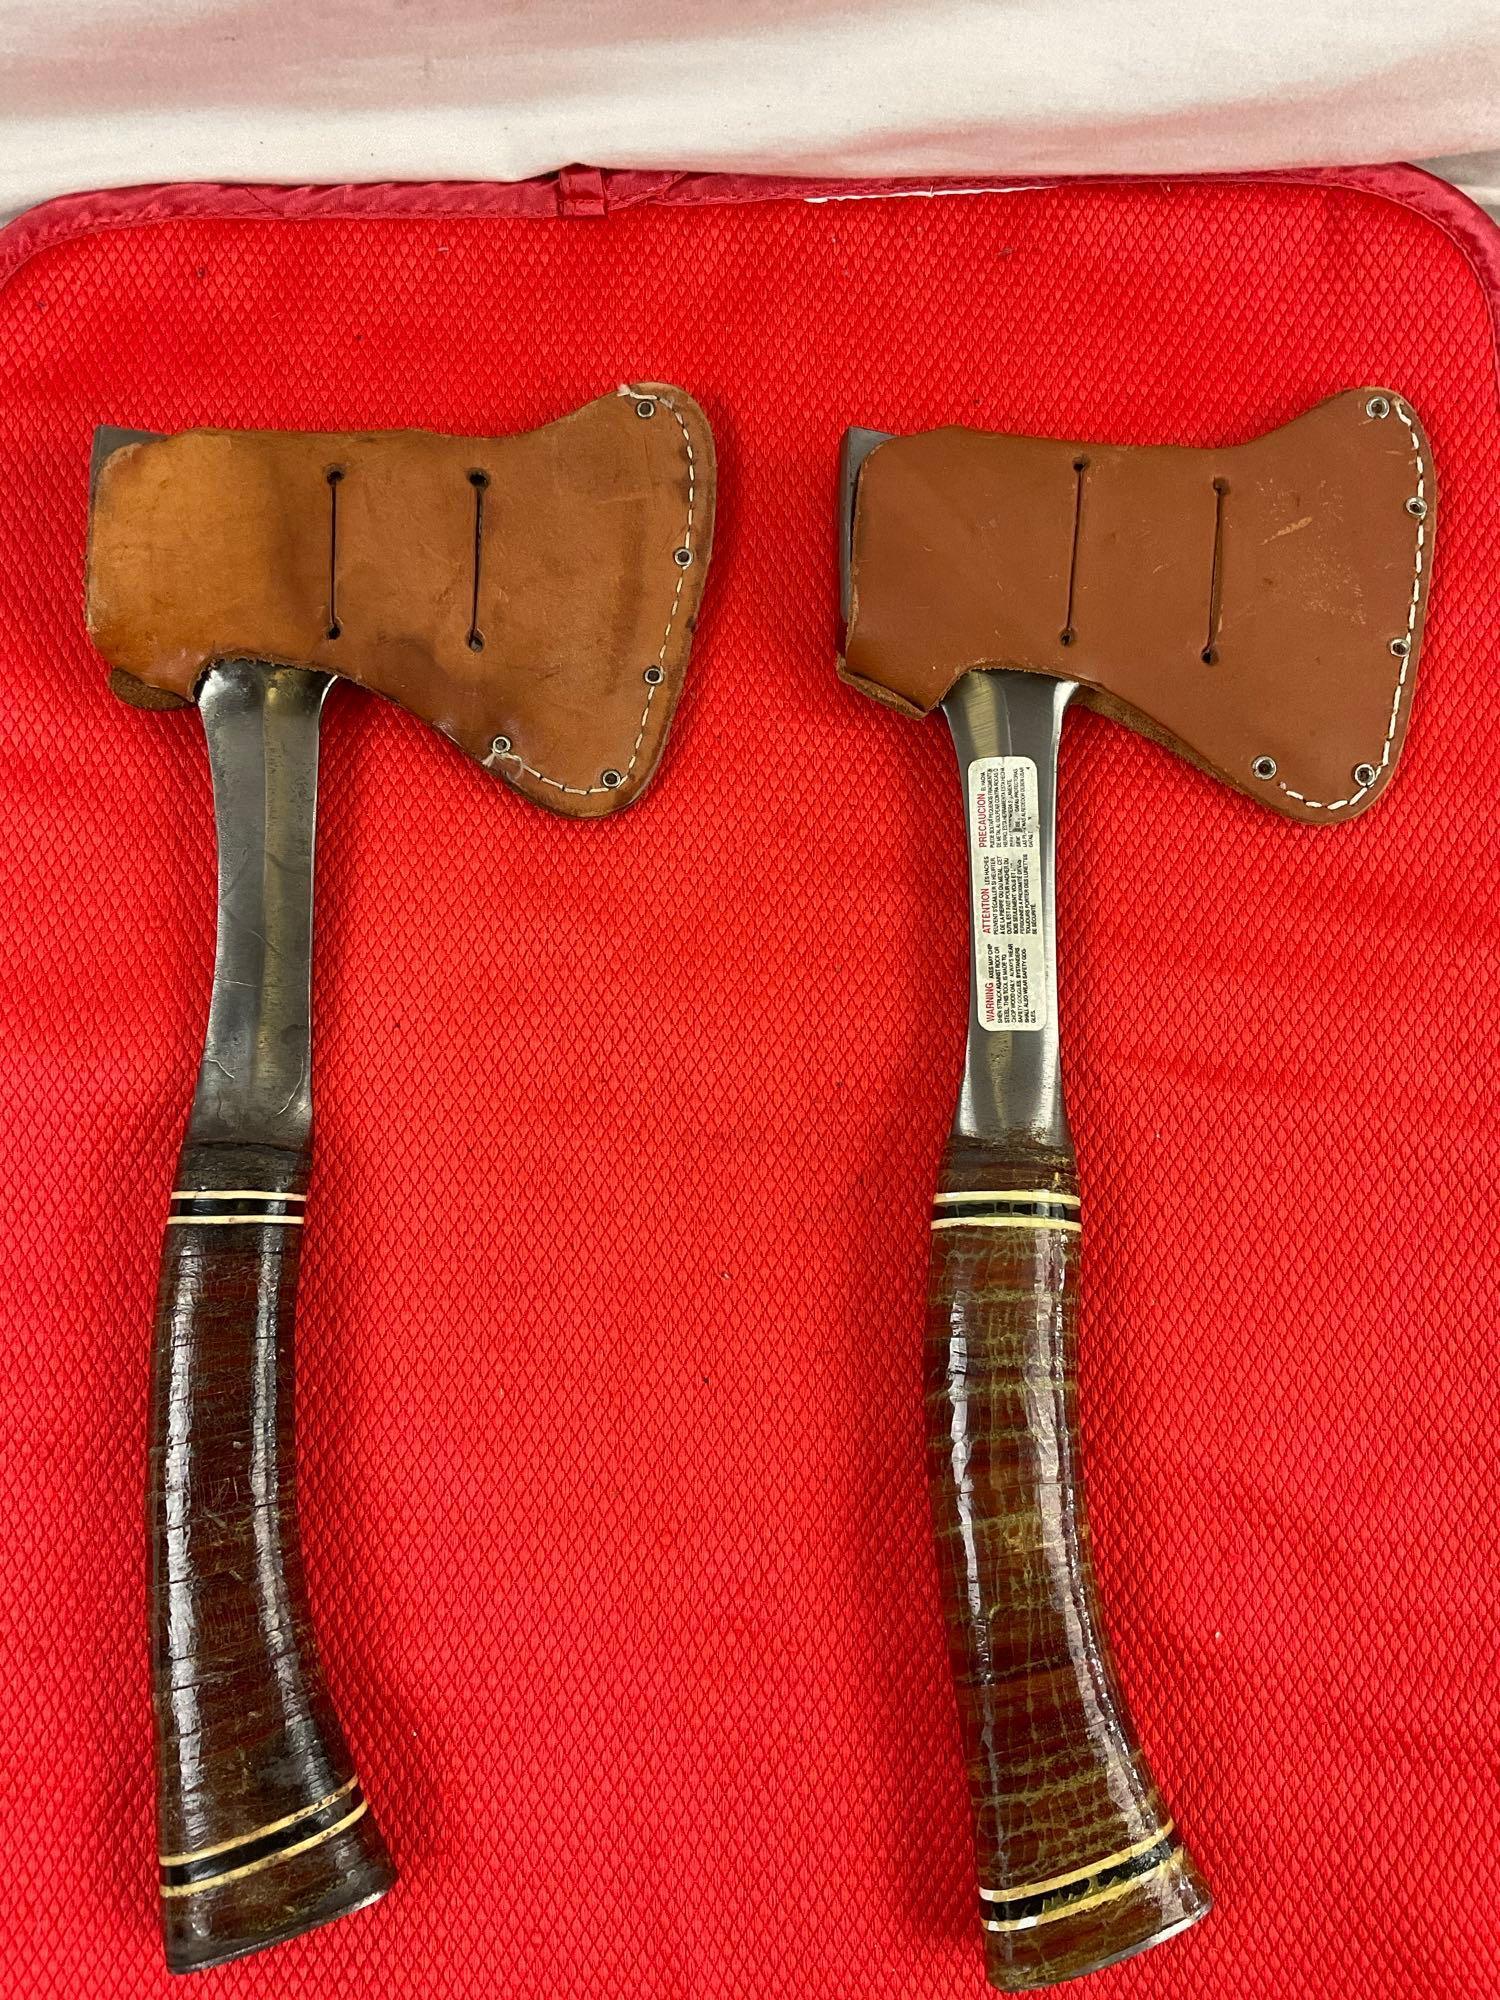 2 pcs Vintage Estwing 14" Steel Camping Hatchets w/ Original Embossed Leather Sheathes #1. See pi...